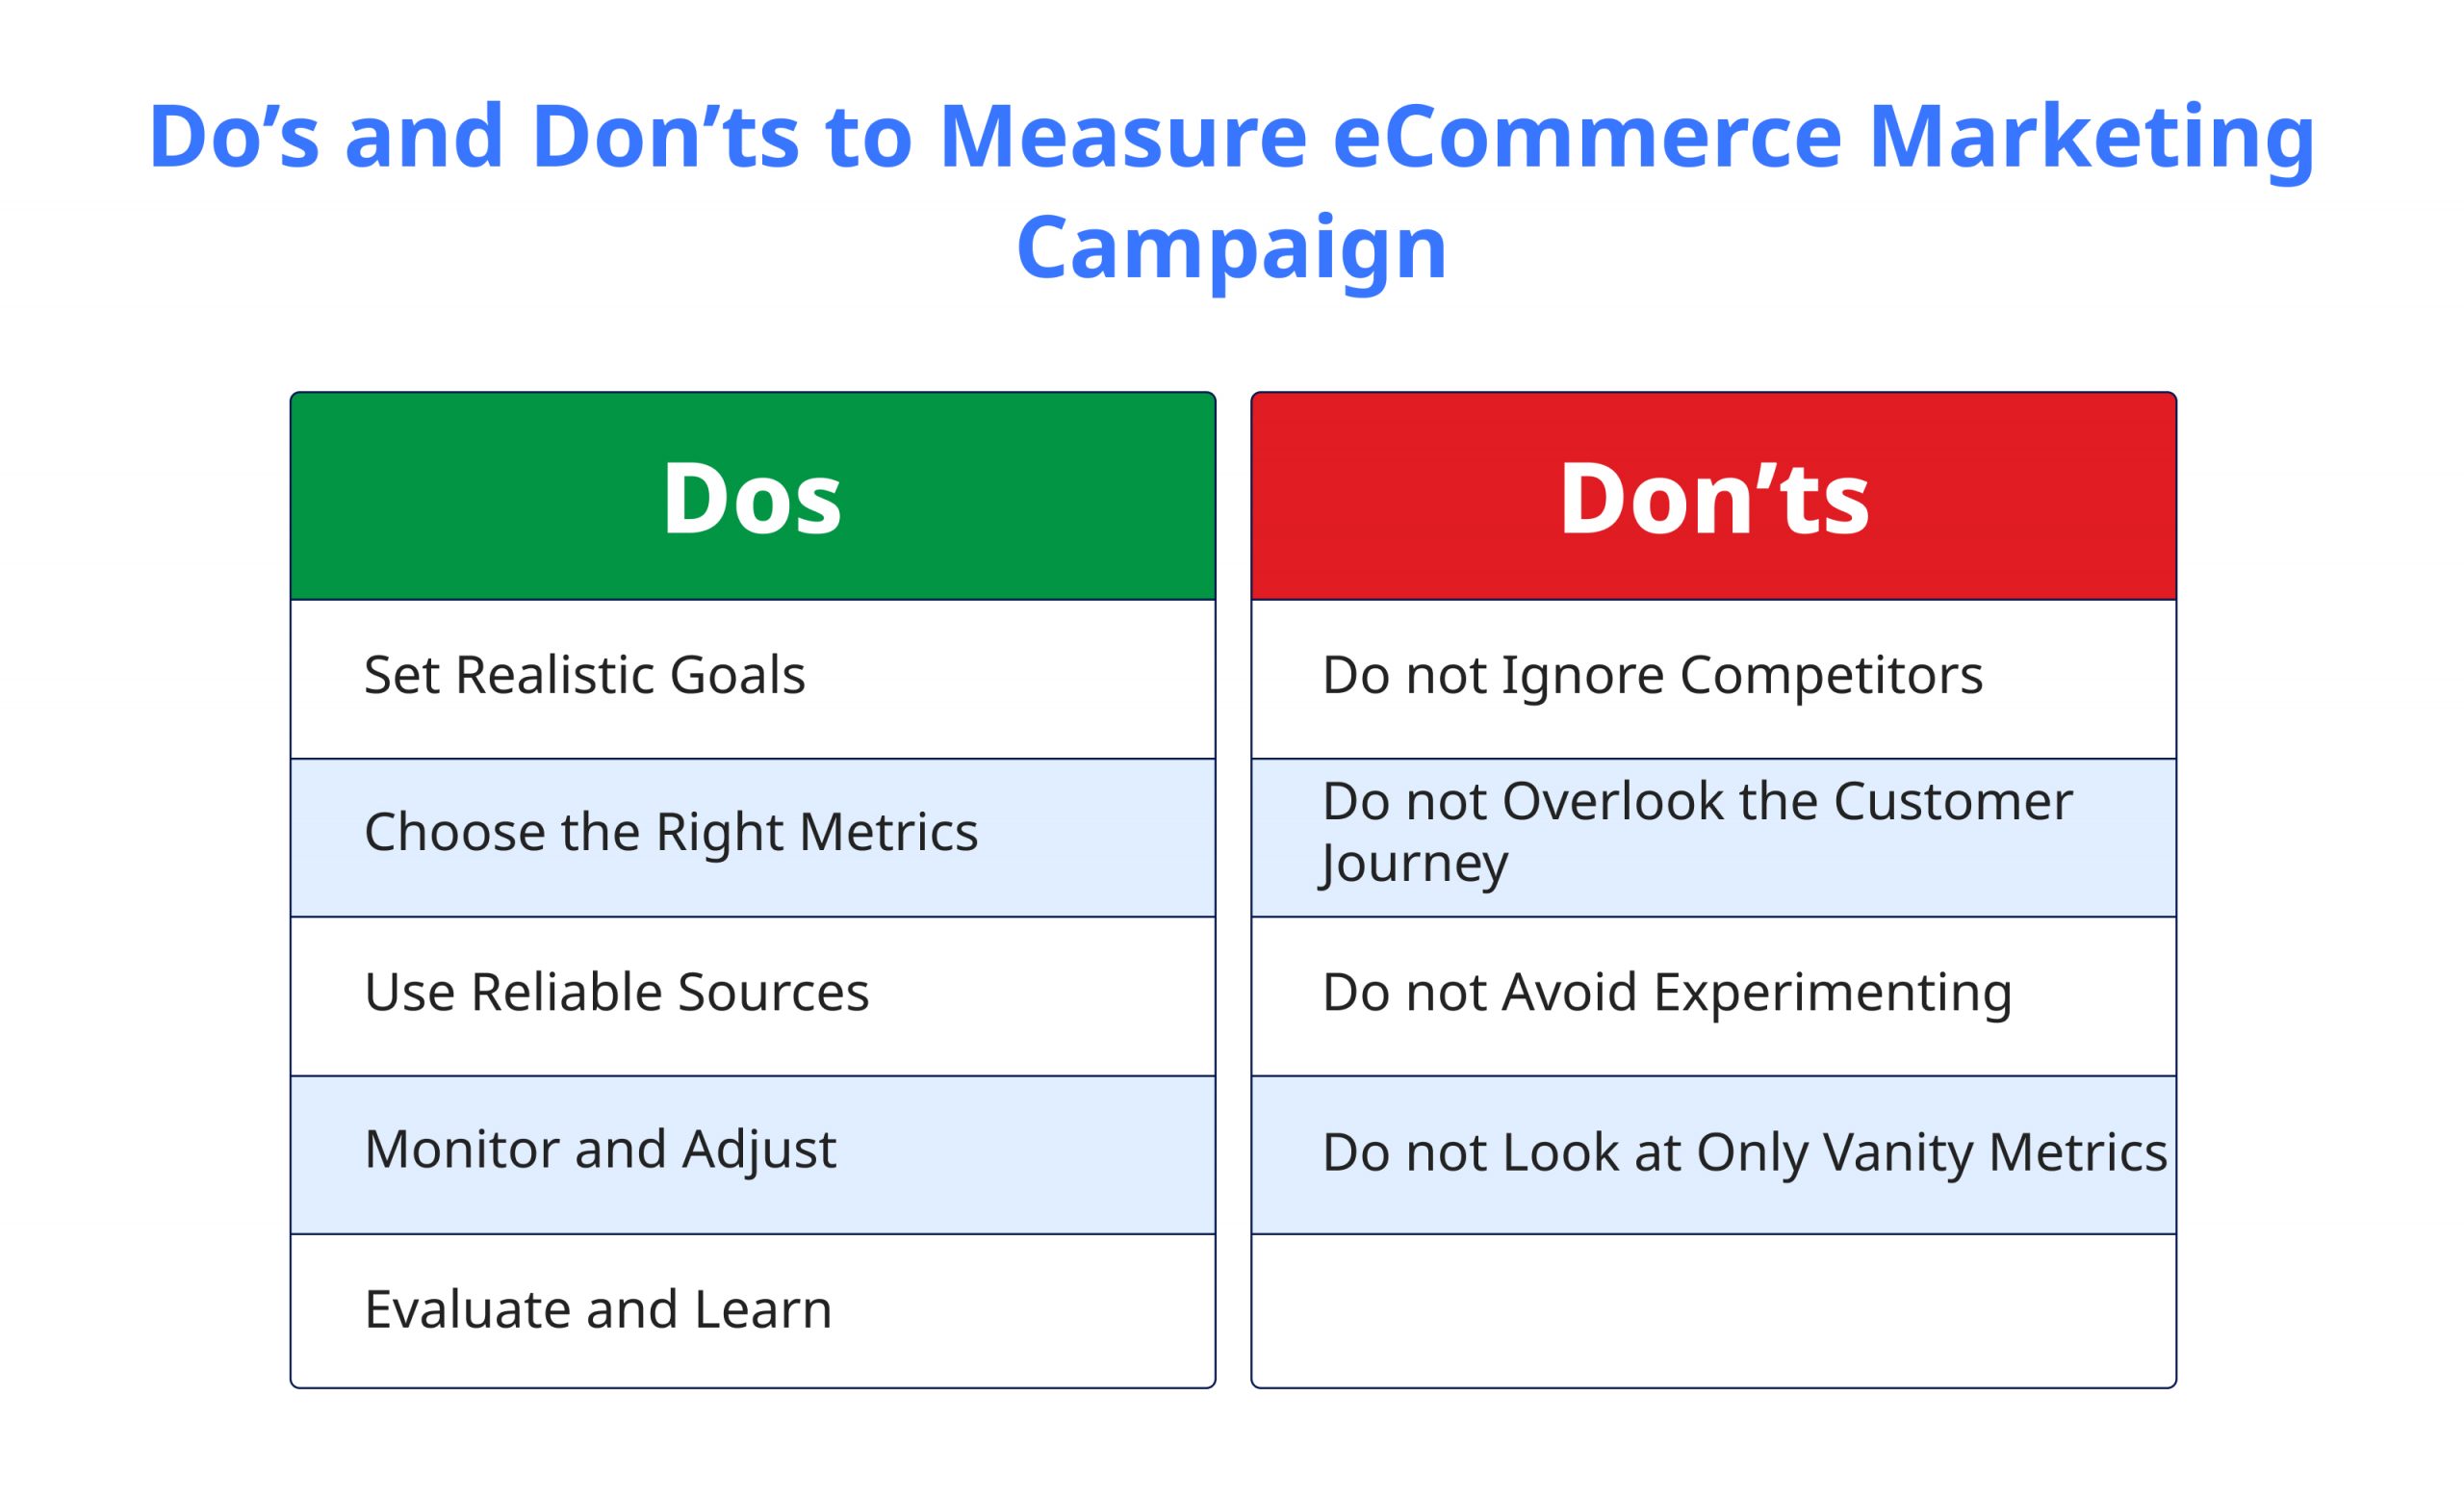 Dos and Donts to Measure eCommerce Marketing Campaign